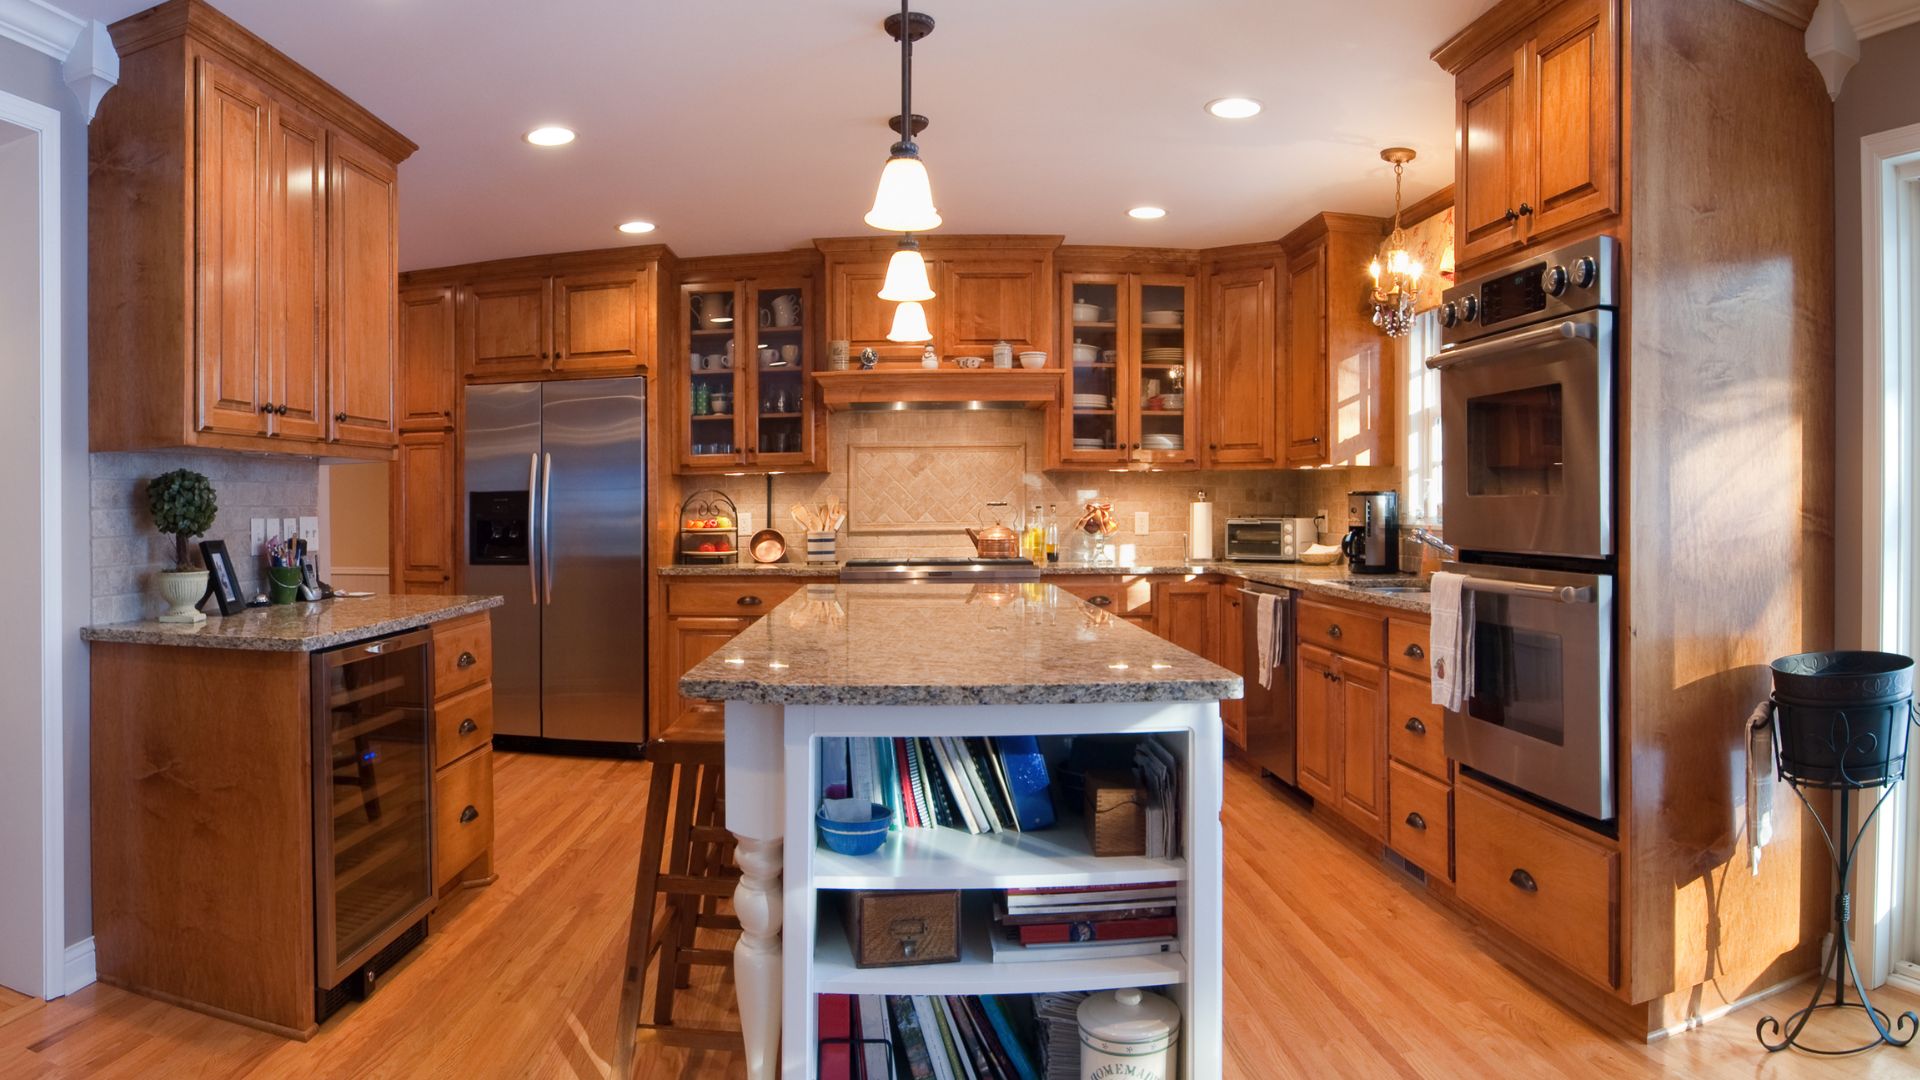 Traditional kitchen style in classic brown cabinets and granite countertop